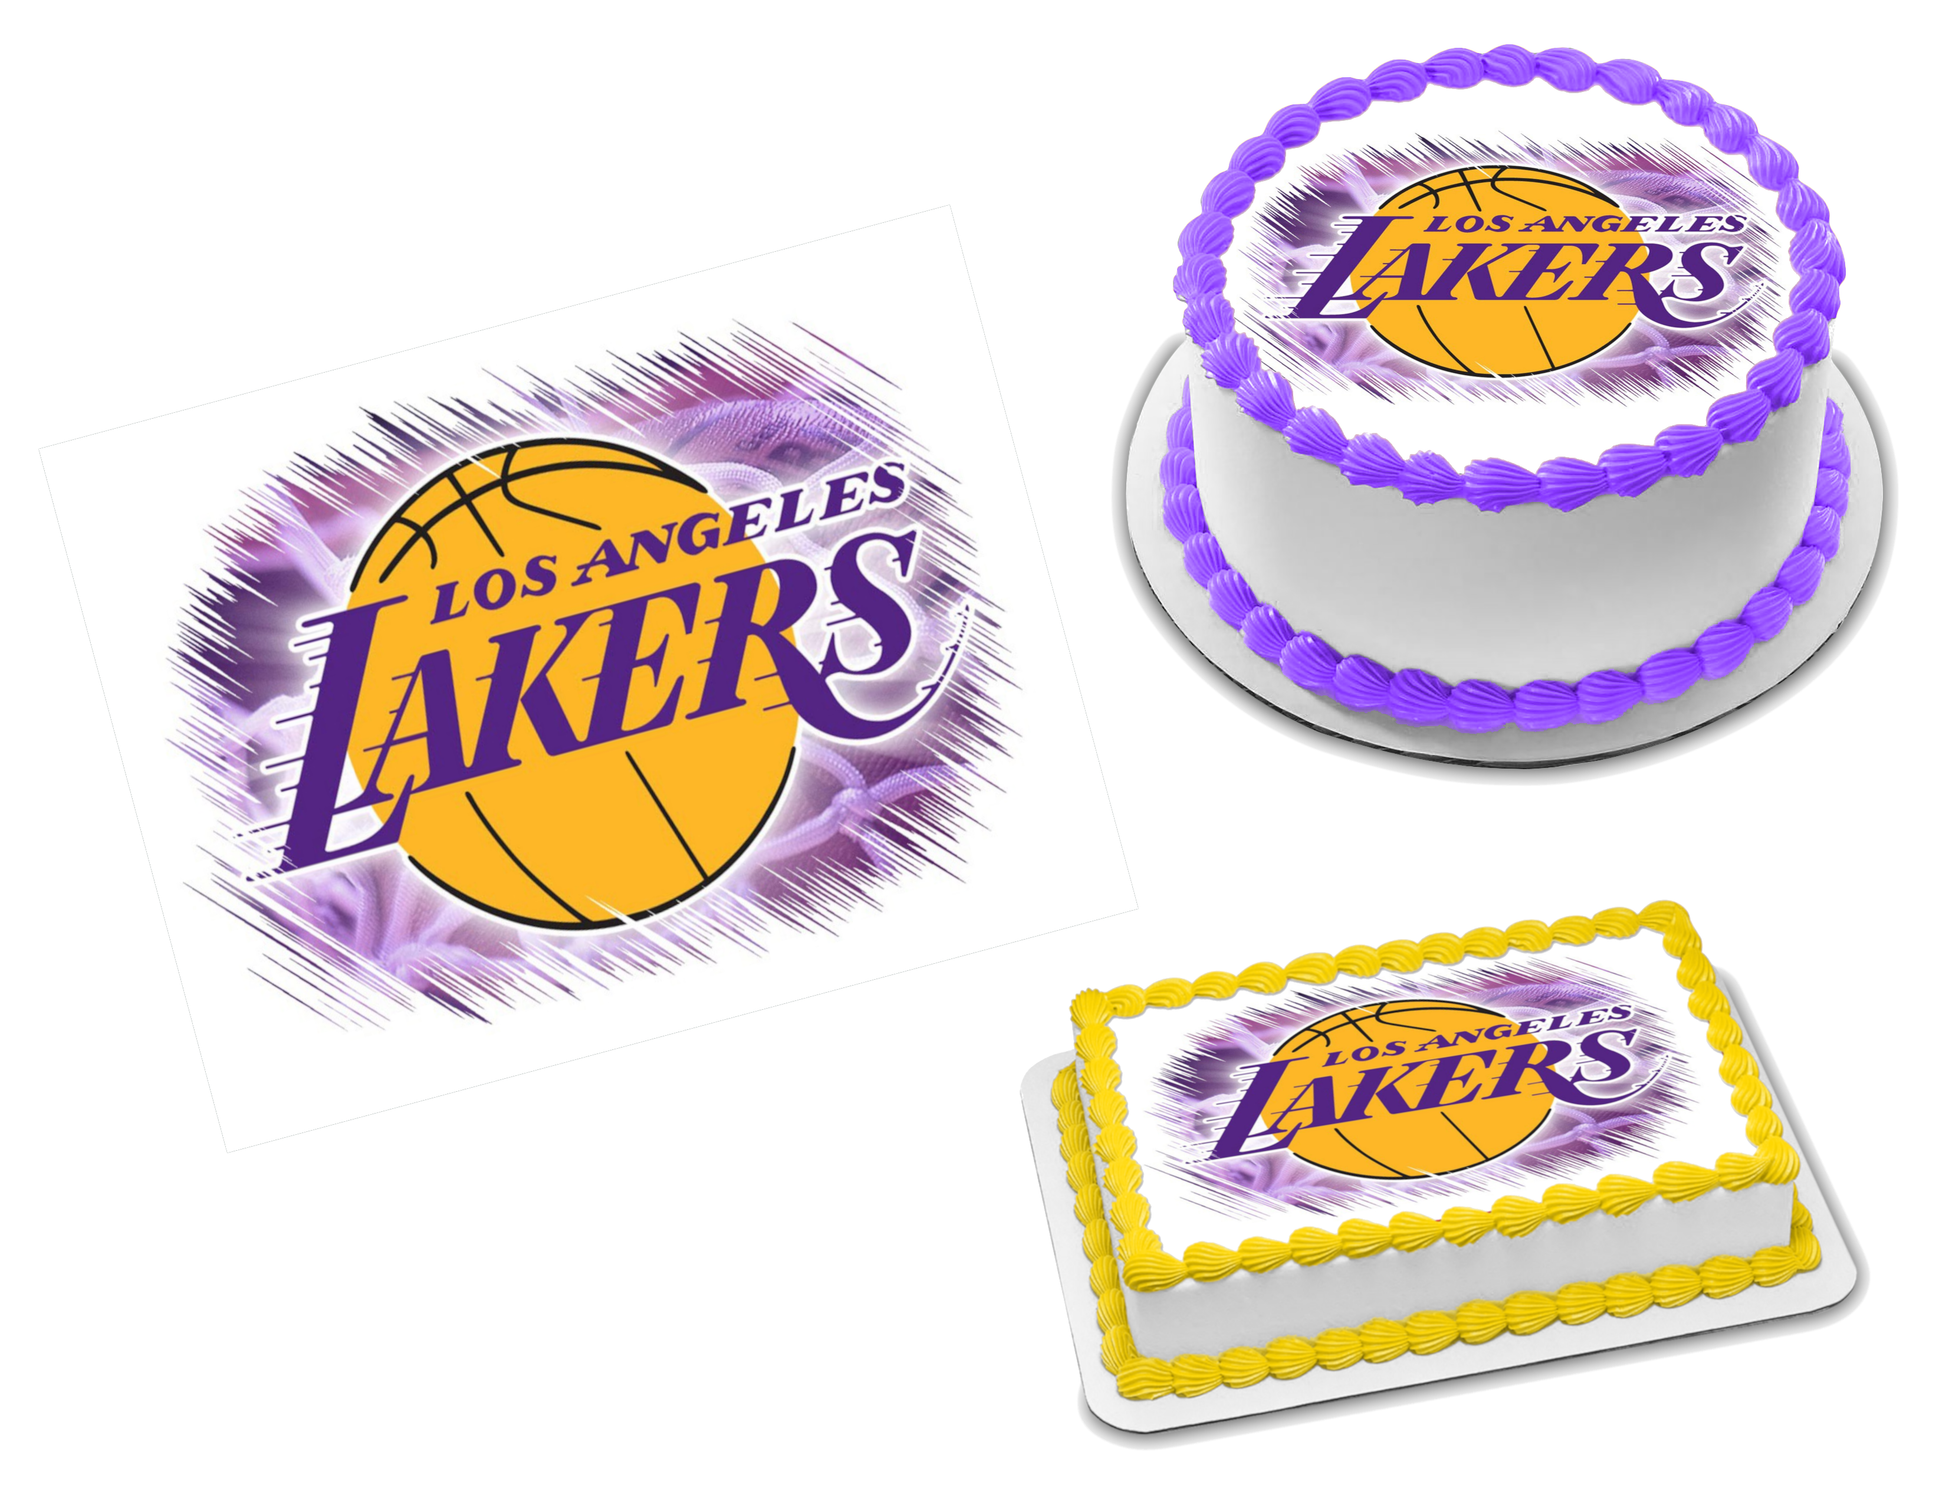 Los Angeles Lakers Edible Image Frosting Sheet #4 (70+ sizes)